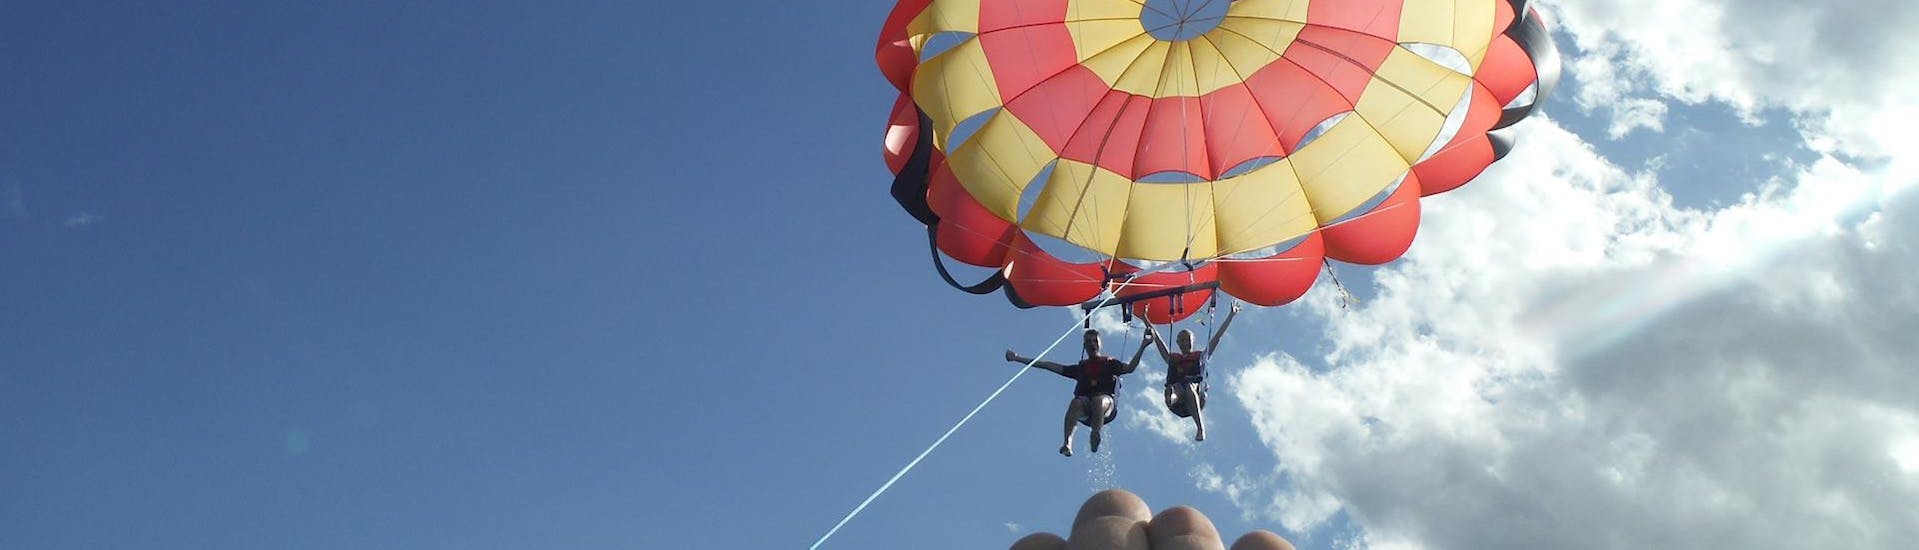 A couple enjoys the flight at an altitude of 100 meters during the Parasailing in Cala Bona, offered by Sea Sports Mallorca.